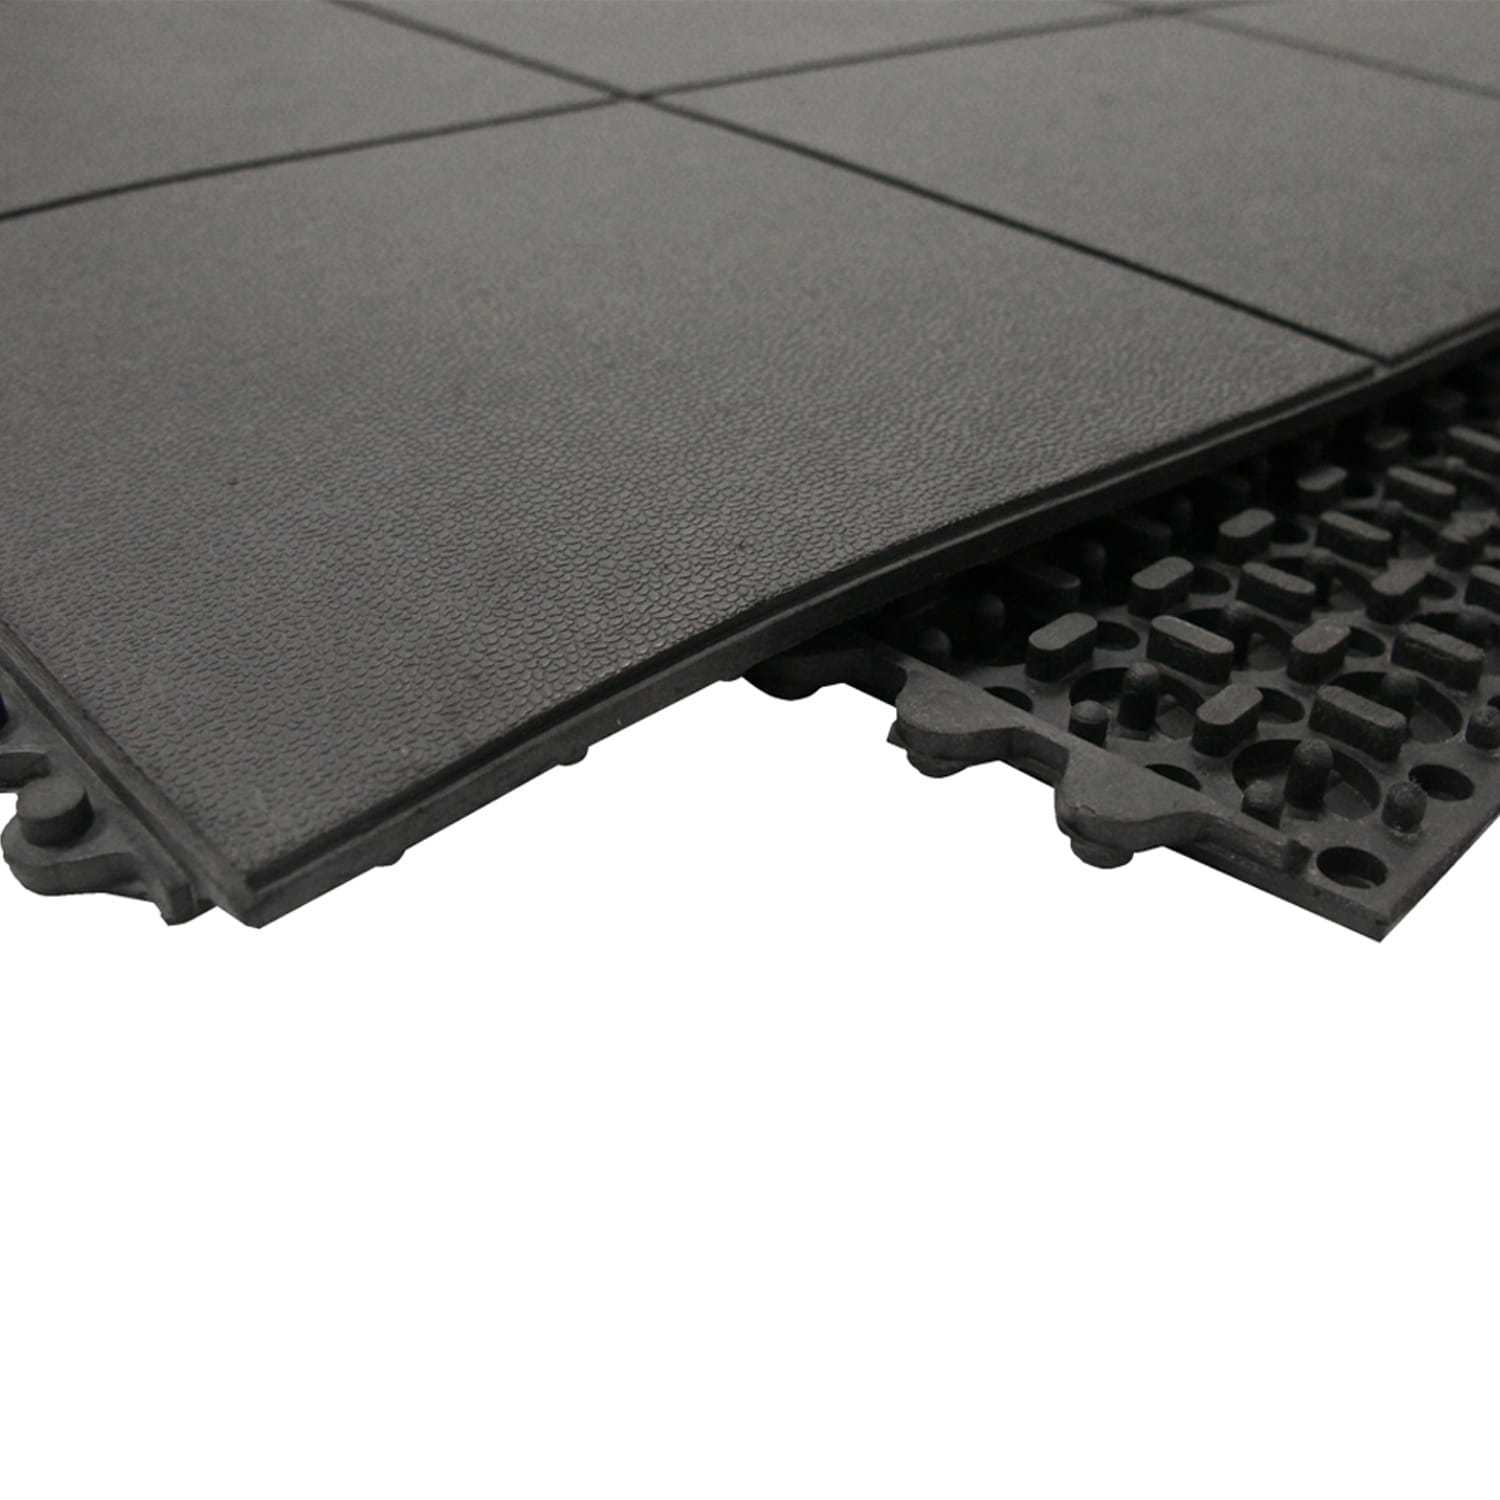 American Floor Mats 1/2in (12mm) Thick Solid Black 4' x 8' Heavy Duty  Rubber Rolls, Protective Exercise Mats, Commercial Gym Flooring